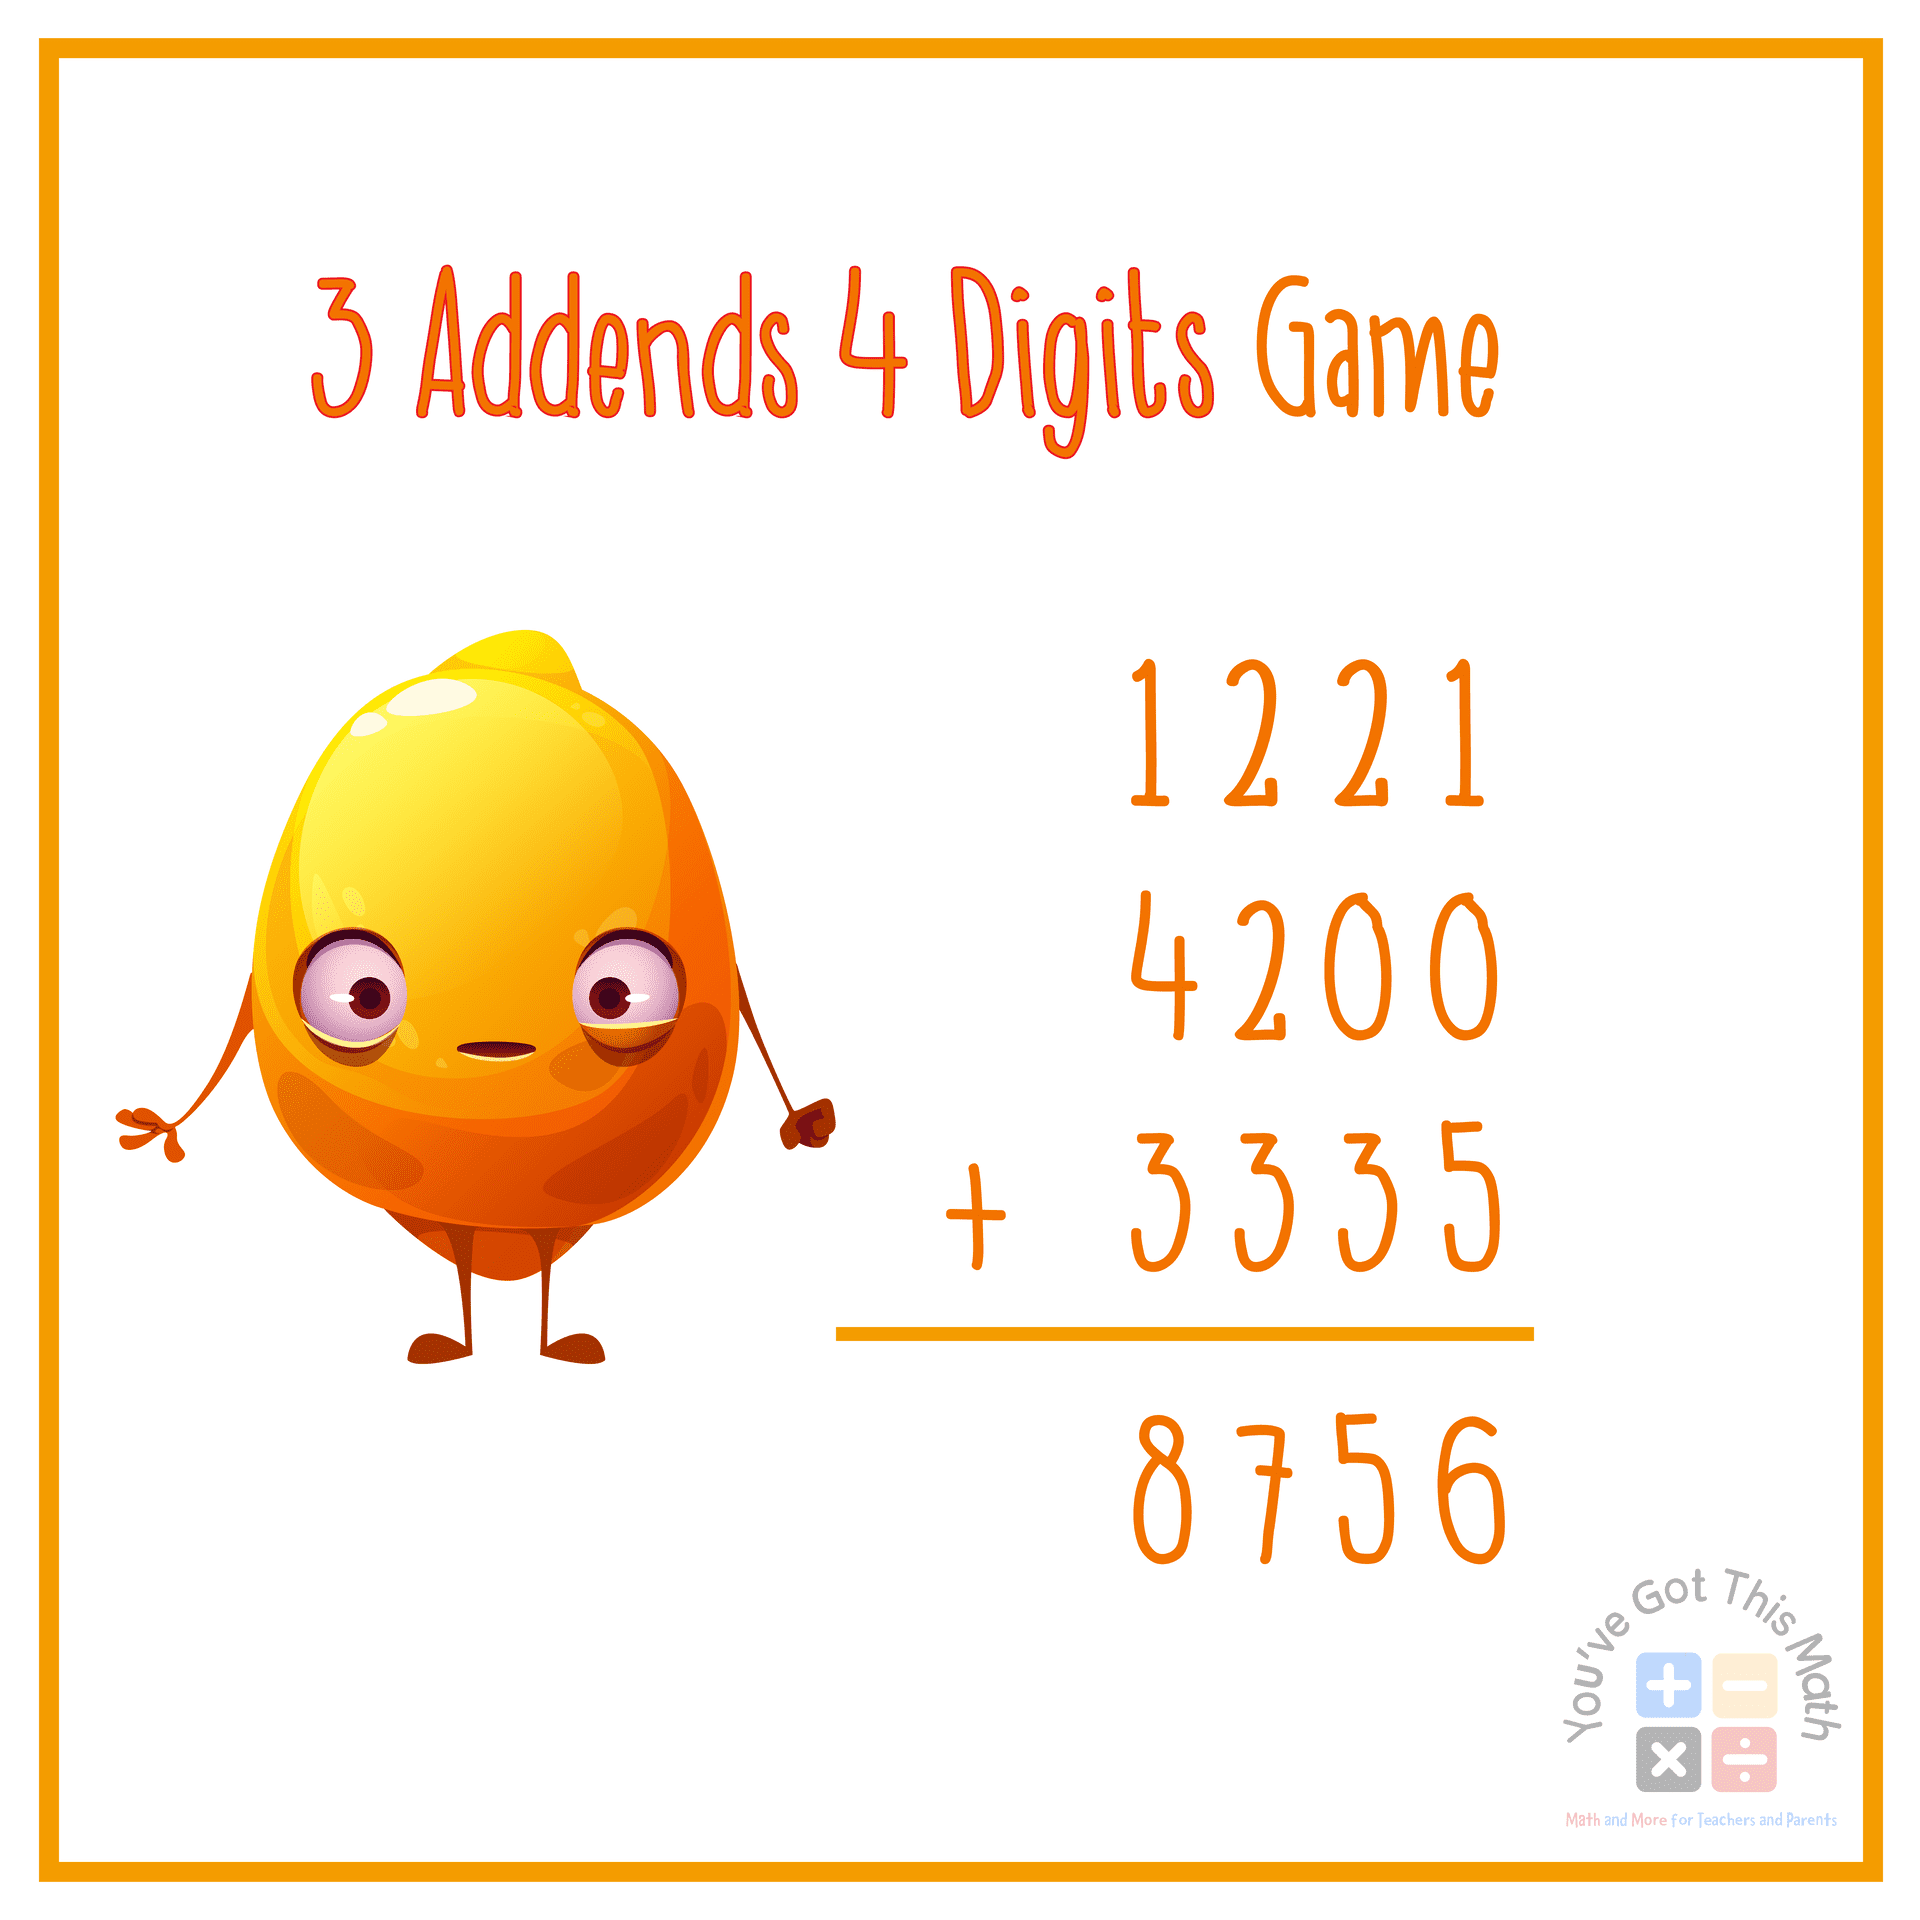 3 addends 4 digits game for adding with 3 addends